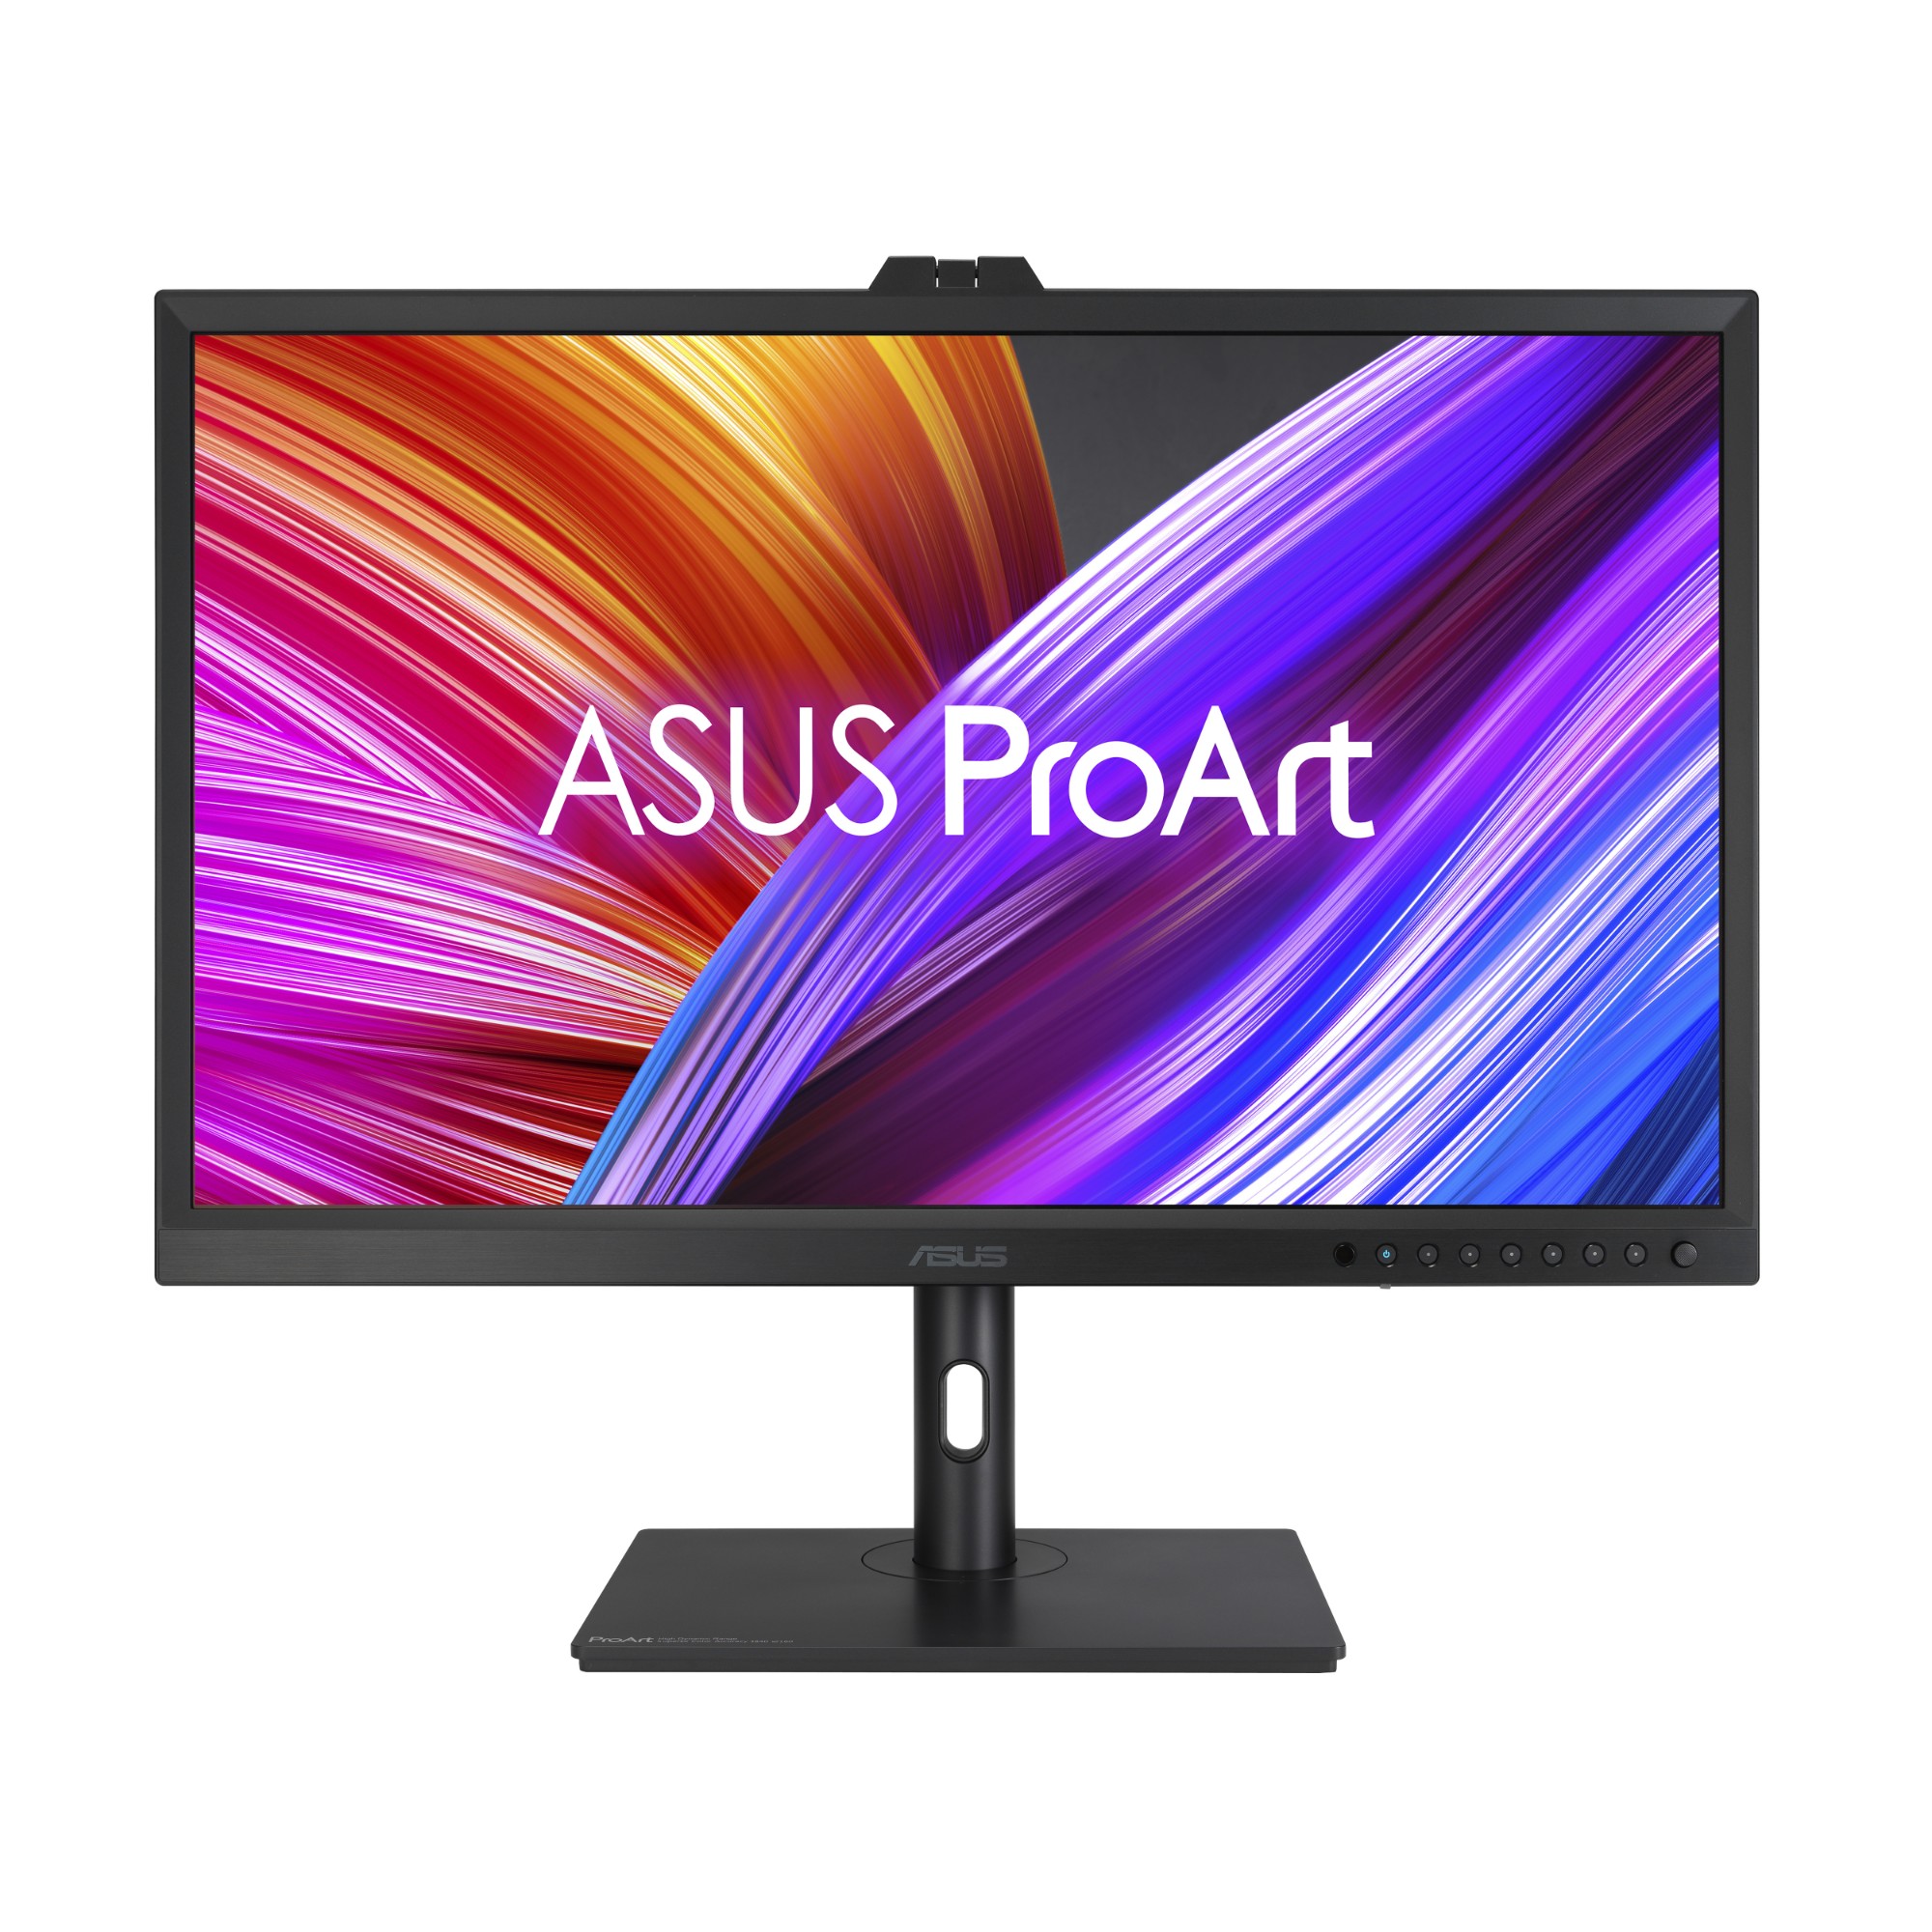 ProArt Display OLED PA32DC Professional Monitor ? 31.5-inch, OLED, 4K UHD (3840 x 2160), 99% DCI-P3, Built-in Motorized Colorimeter, Auto Calibration, HDR-10, HLG, ?E < 1, USB-C, HDMI, Hardware Calibration, Calman Ready, ColourSpace Integration